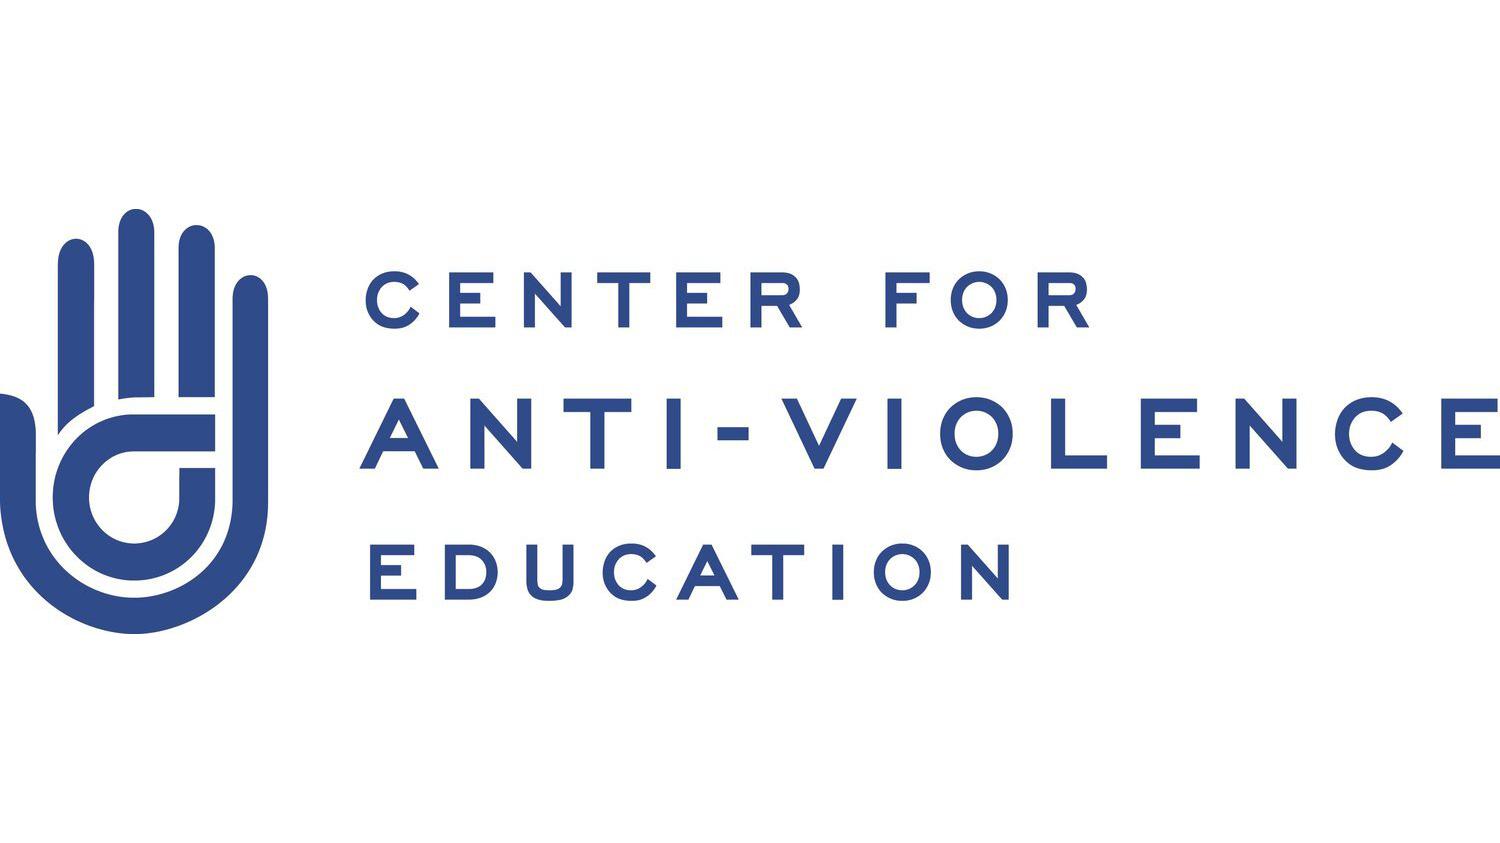 The Center For Anti-Violence Education Inc logo